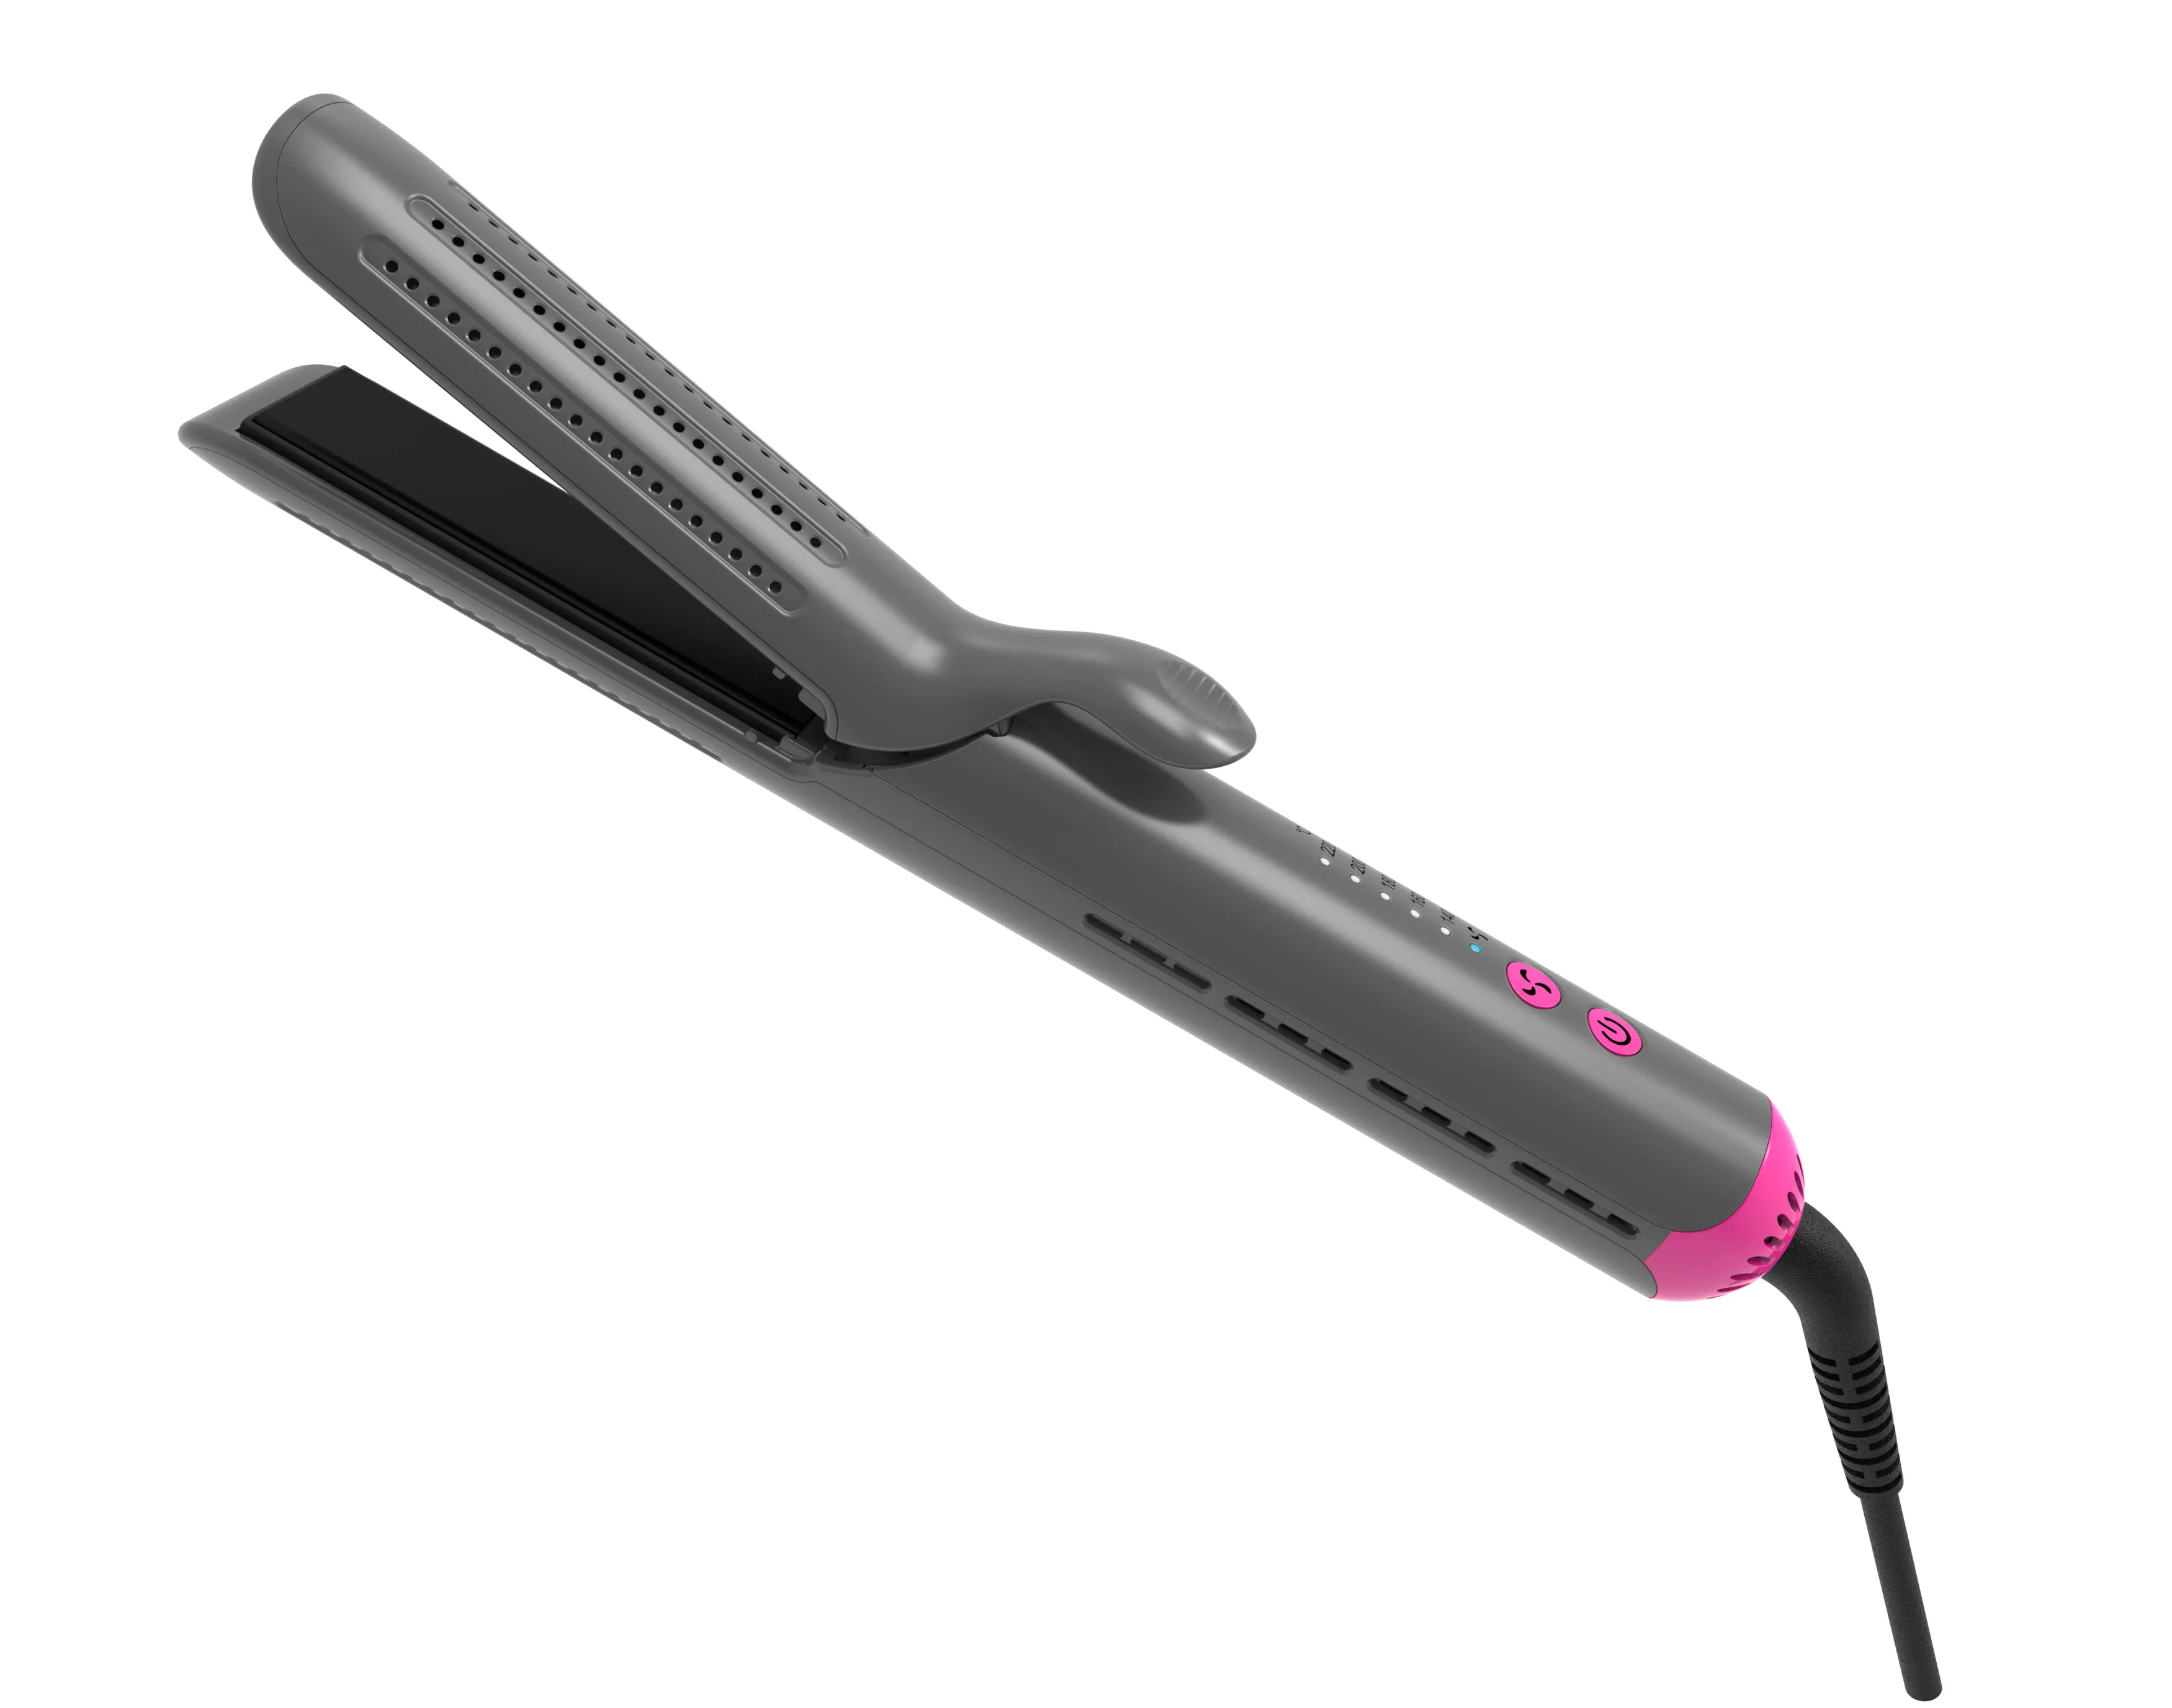 2-in-1 Cool Air Curling Iron and Flat Iron Luxe, Protects Against Damage and Locks in Style for Effortless Long Lasting Curls